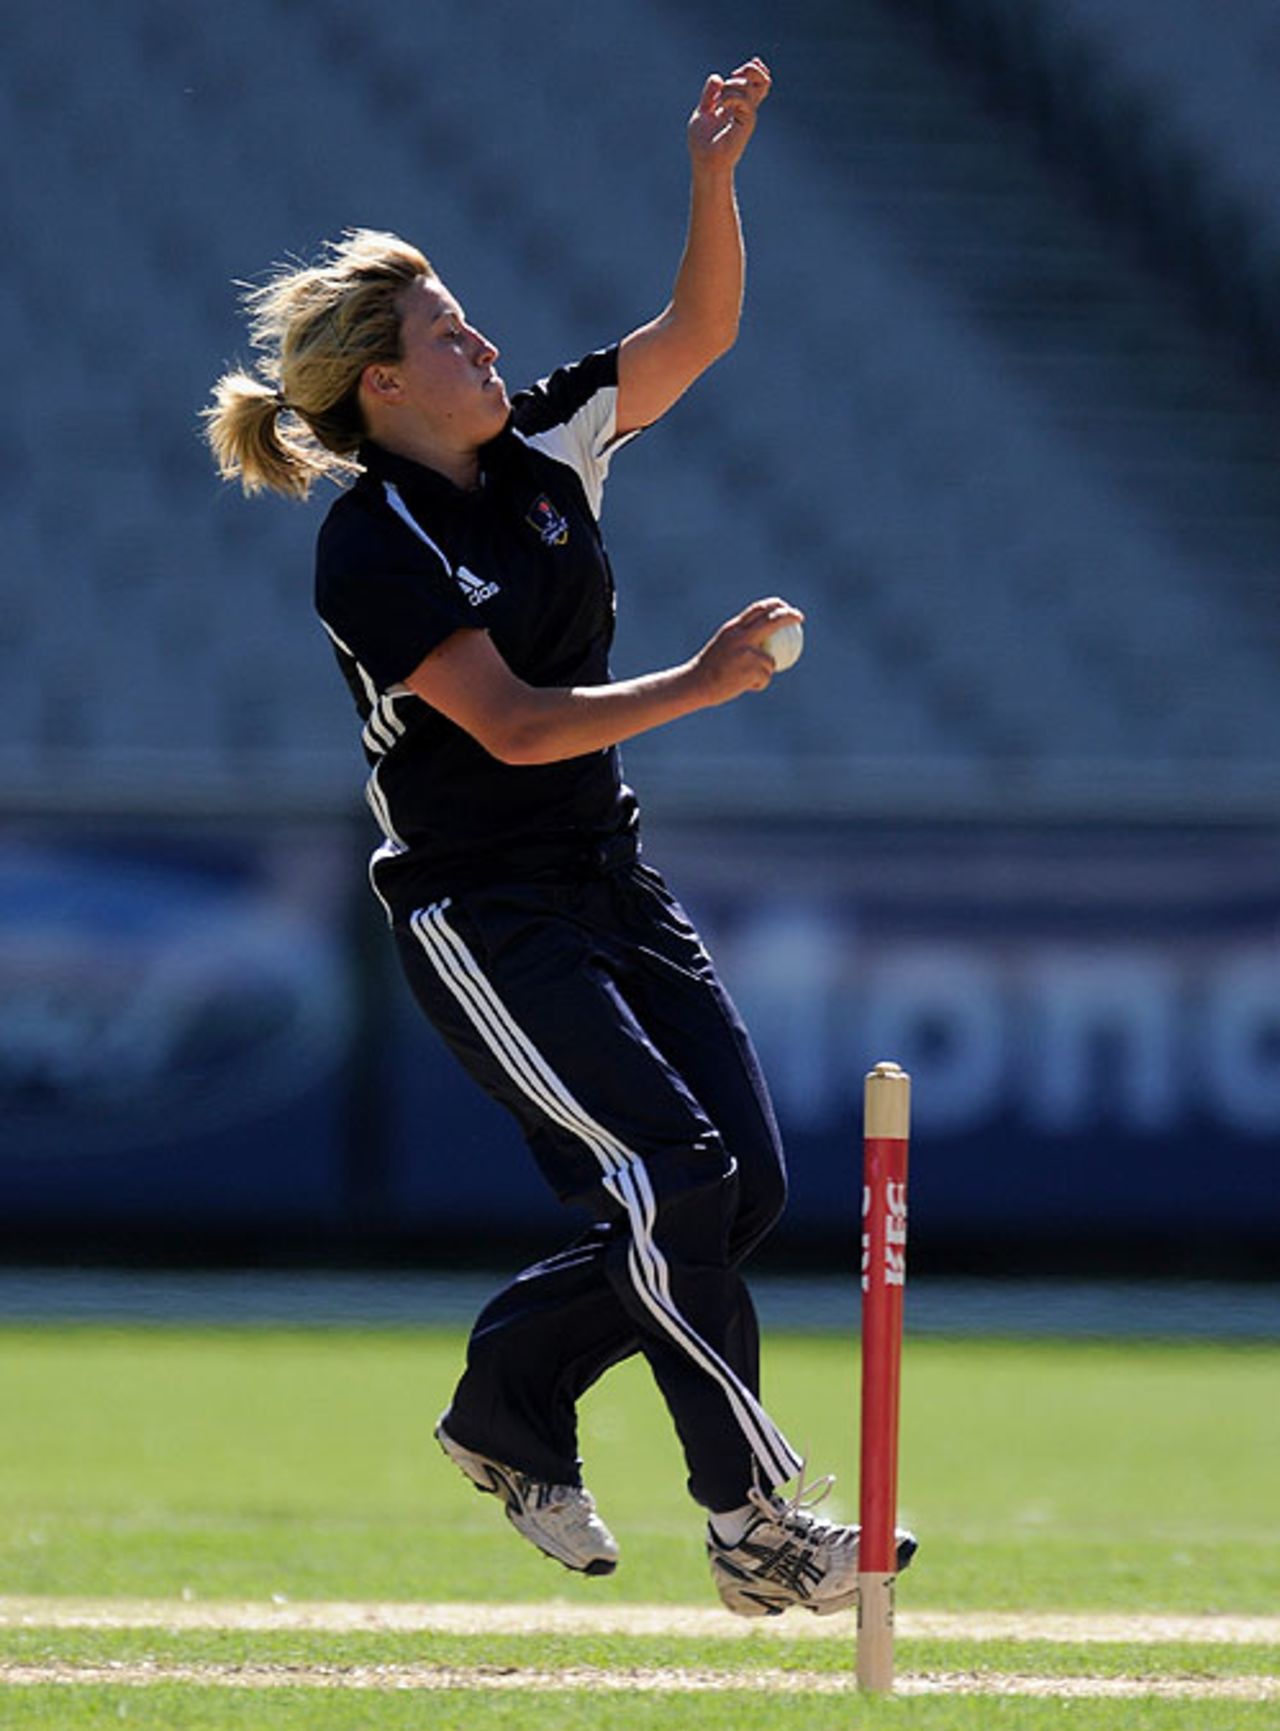 Briana Binch bowls during the W Twnety20 match between the Victoria Women and Western Australia Women held at the Melbourne Cricket Ground January 8, 2009